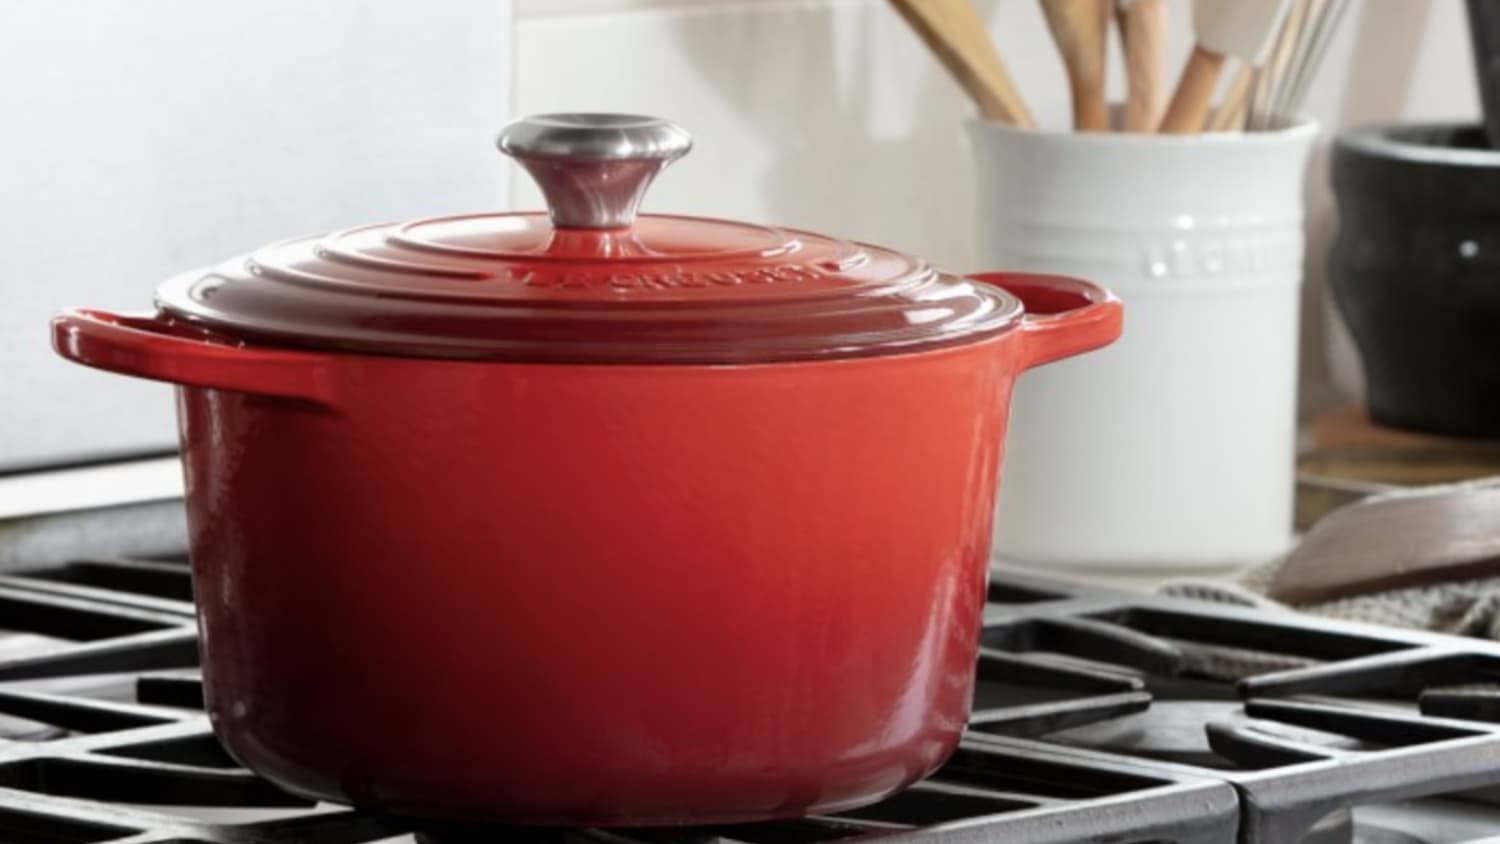 https://cdn.apartmenttherapy.info/image/upload/f_jpg,q_auto:eco,c_fill,g_auto,w_1500,ar_16:9/commerce%2FLe-Creuset-Red-Deep-Oven